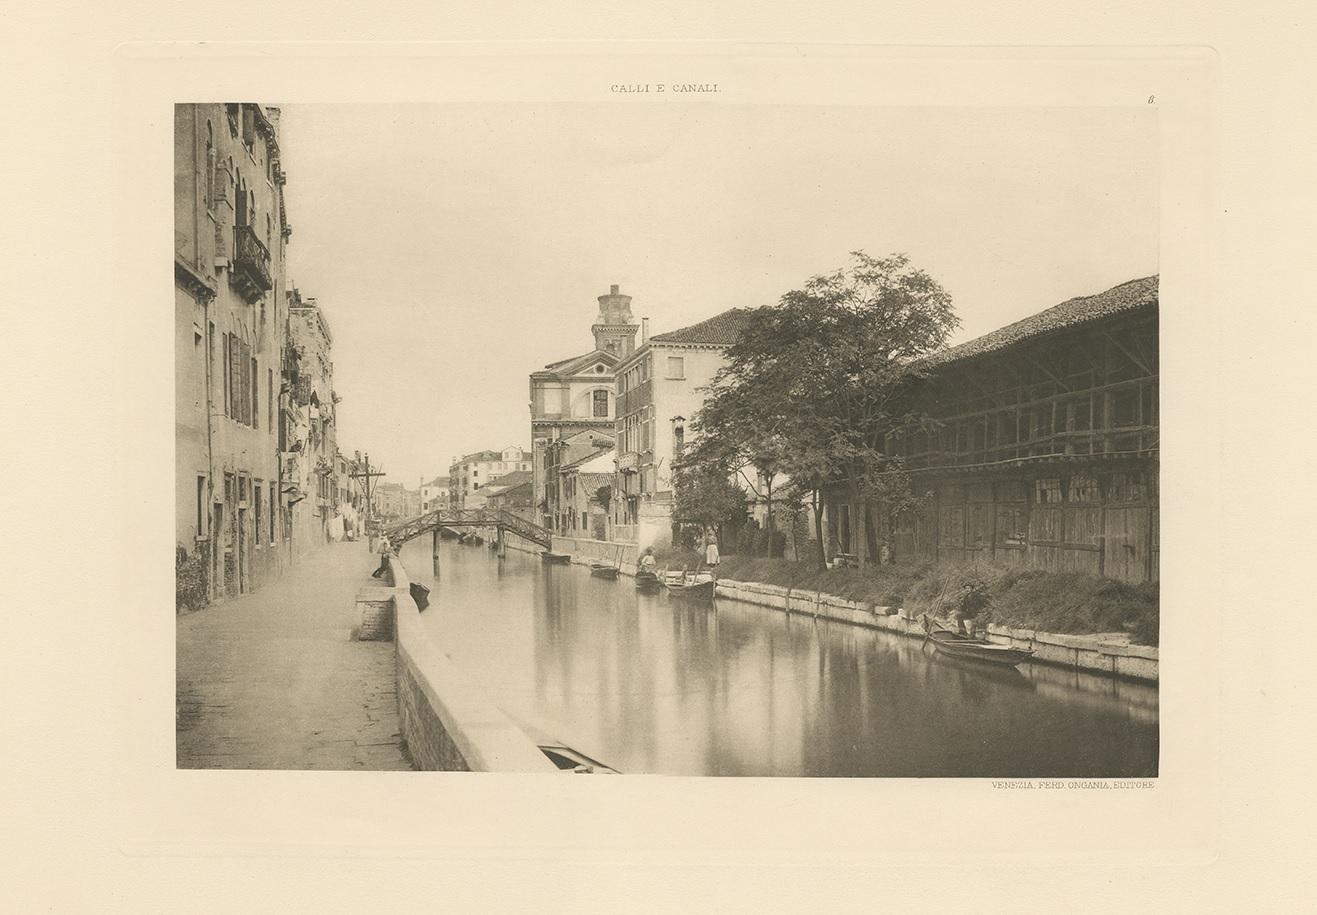 Photogravure of Rio di S. Girolamo in Venice, Italy. The ancient 'chiovere' and the church of the Saint can be seen to the right. The chiovere were sheds, used for distending and drying the woollen cloths manufactured in Venice. 

This print